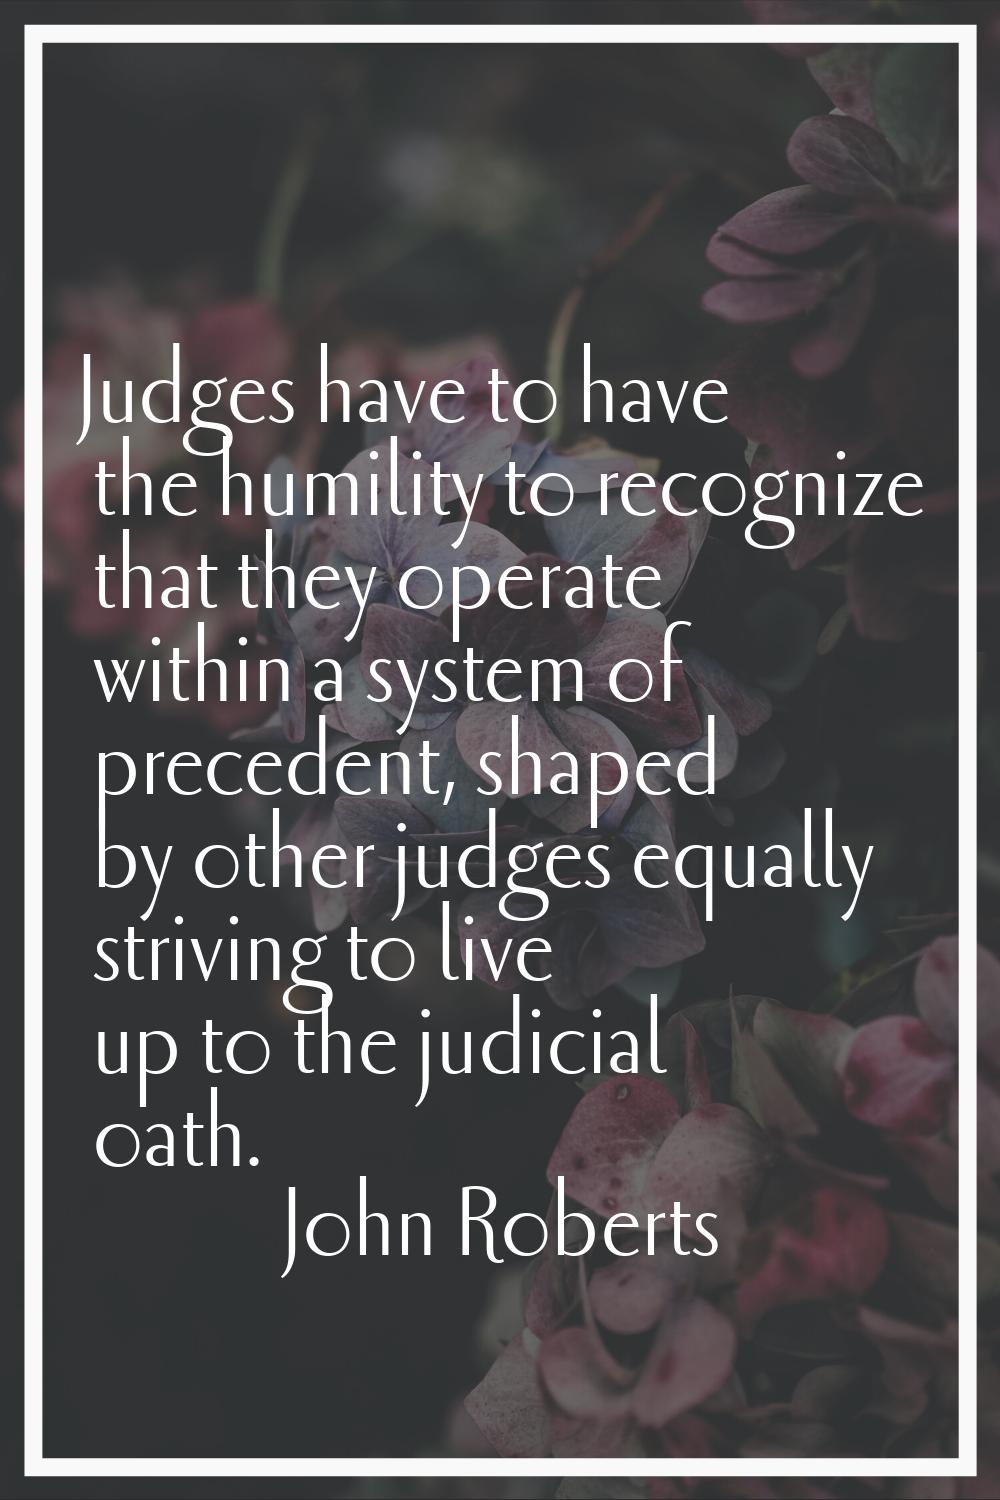 Judges have to have the humility to recognize that they operate within a system of precedent, shape